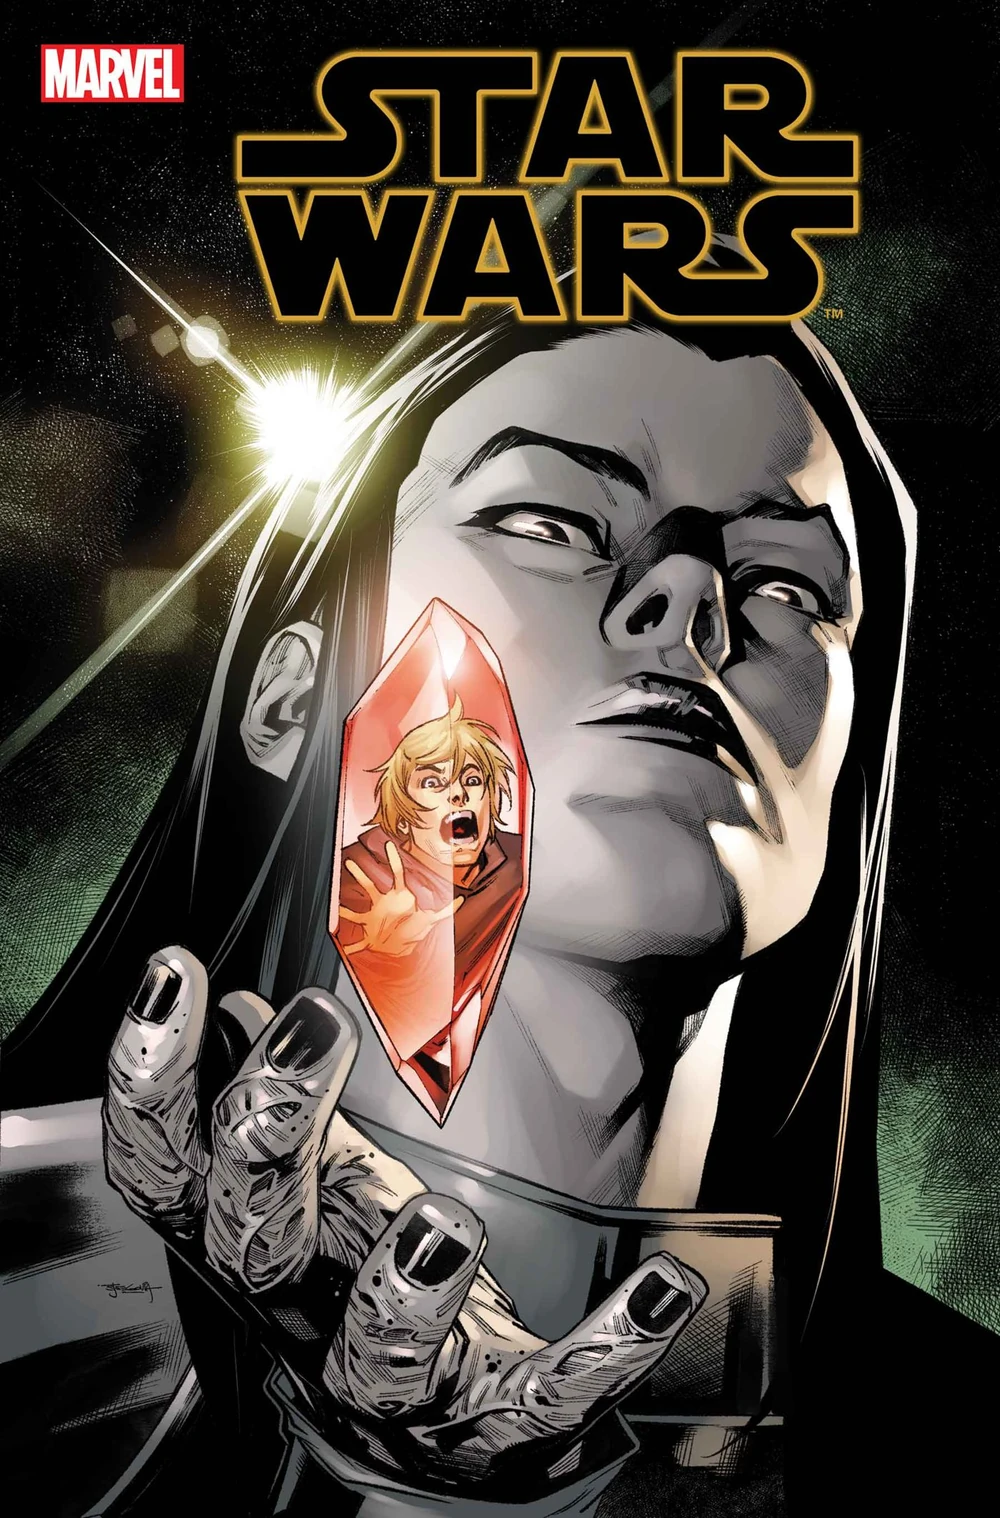 Star Wars #42, Luke's journey to Return of the Jedi continues